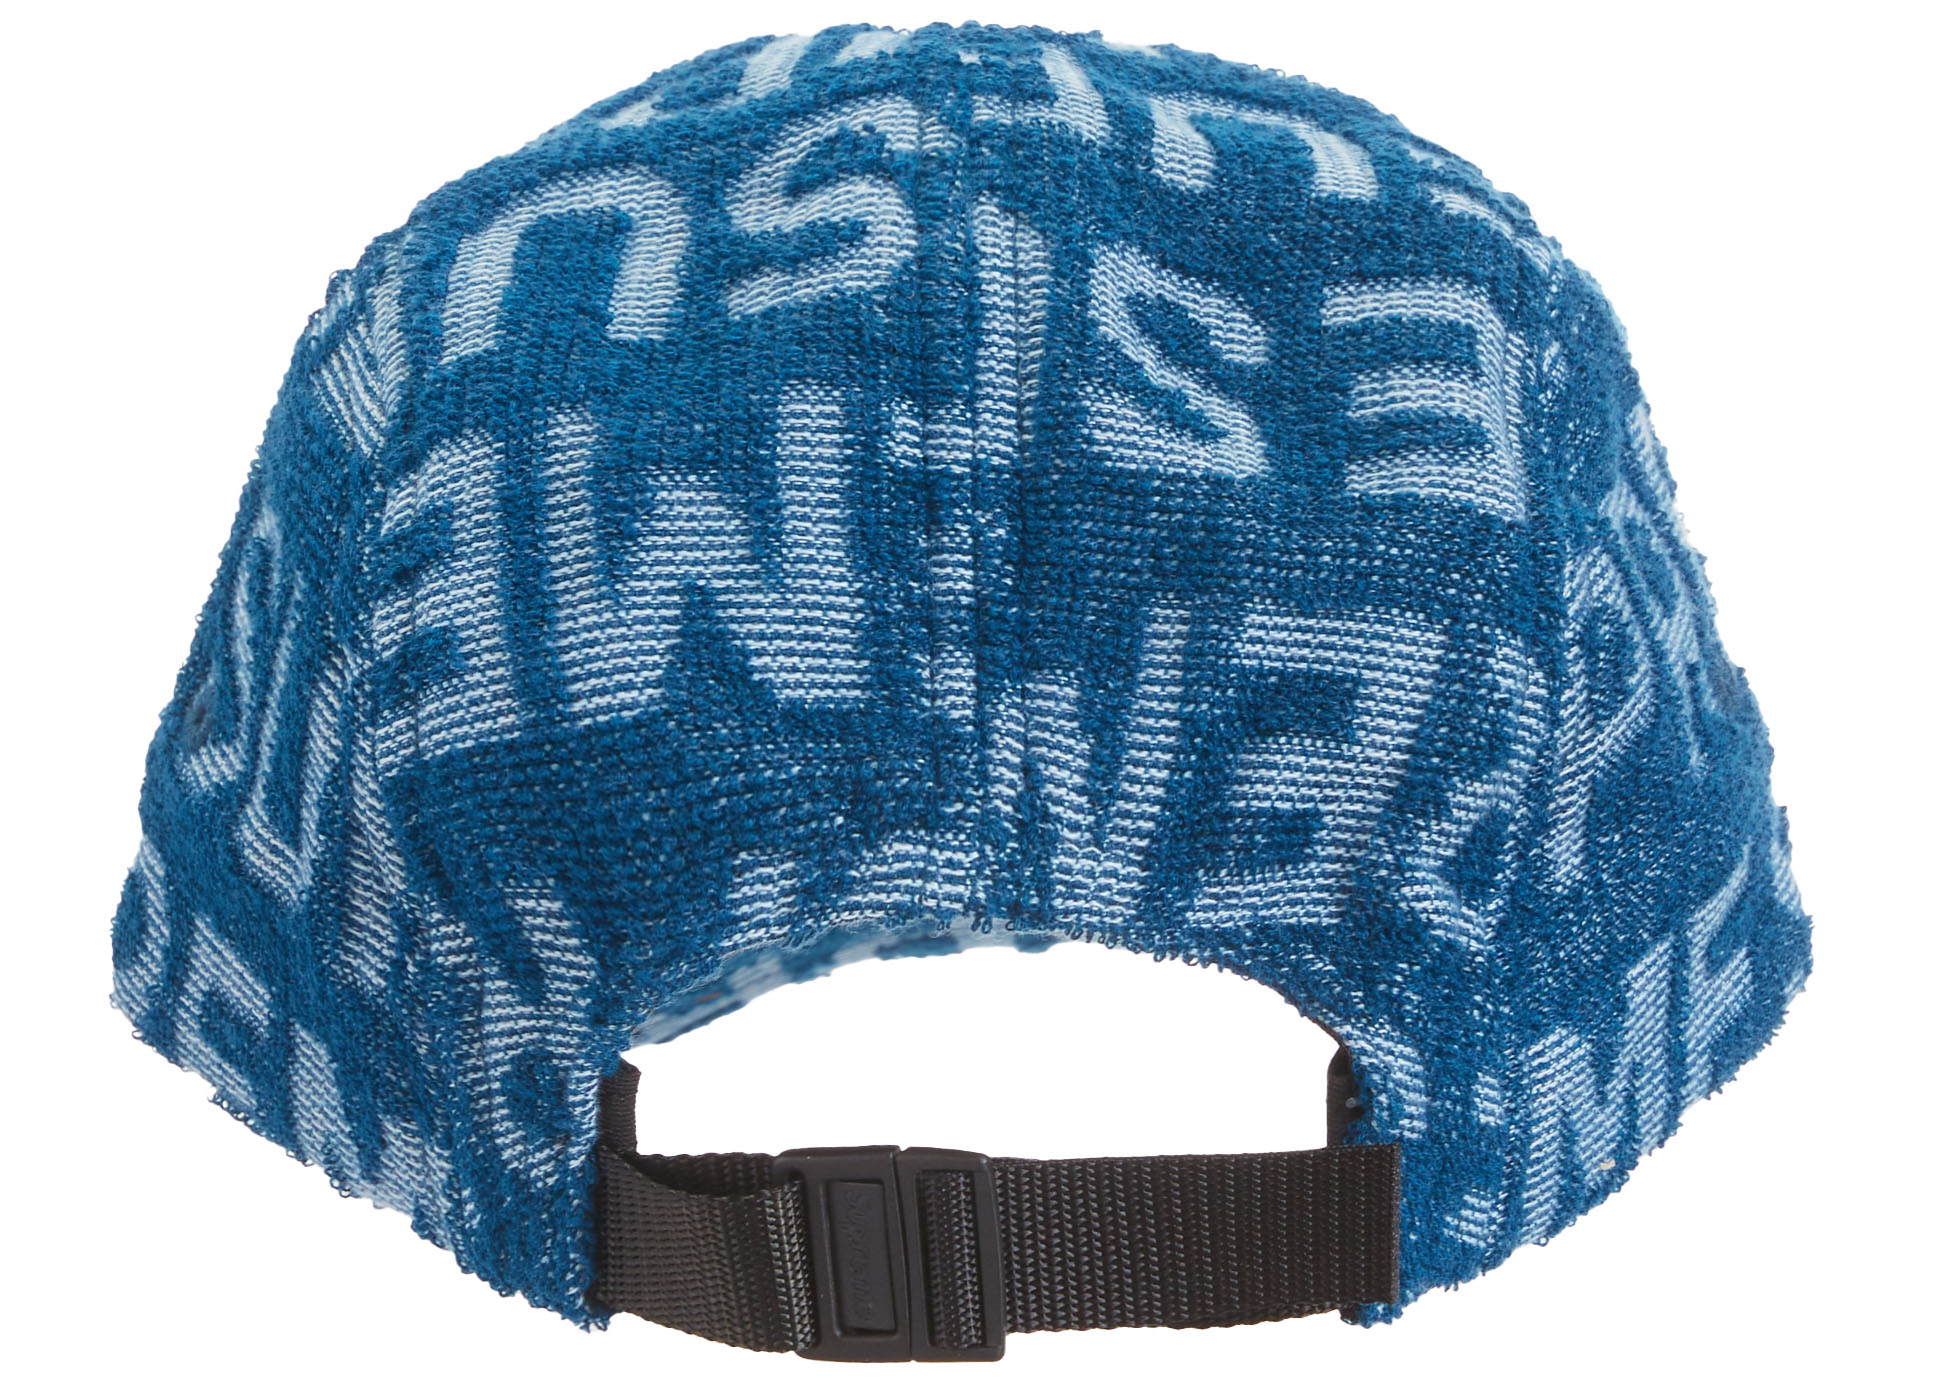 Supreme Terry Spellout Camp Cap Blue